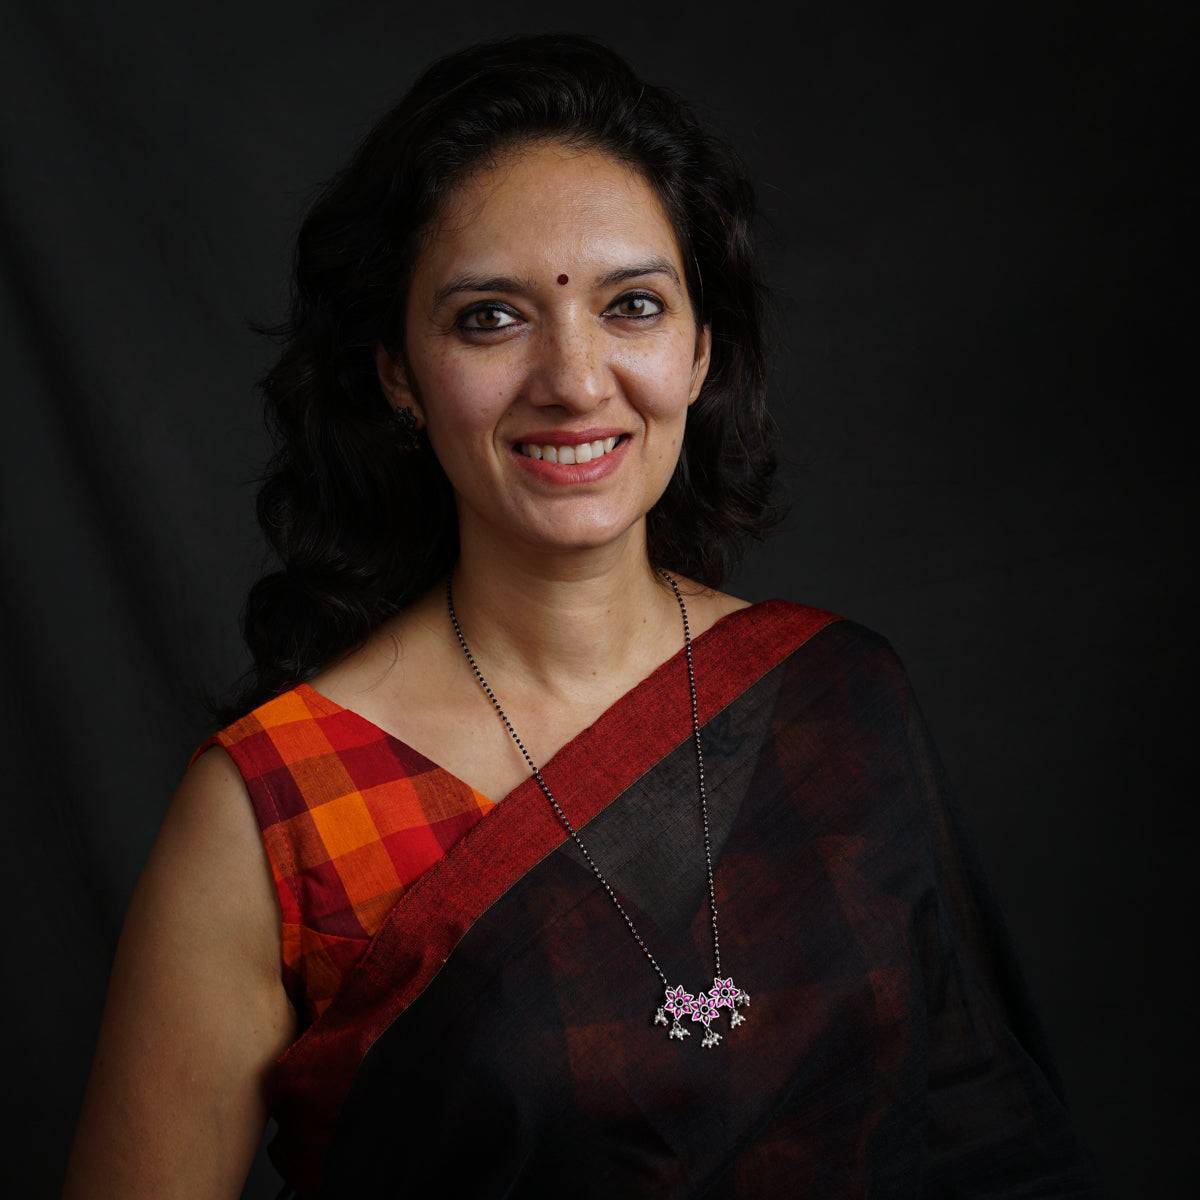 a woman in a red and black sari smiles at the camera